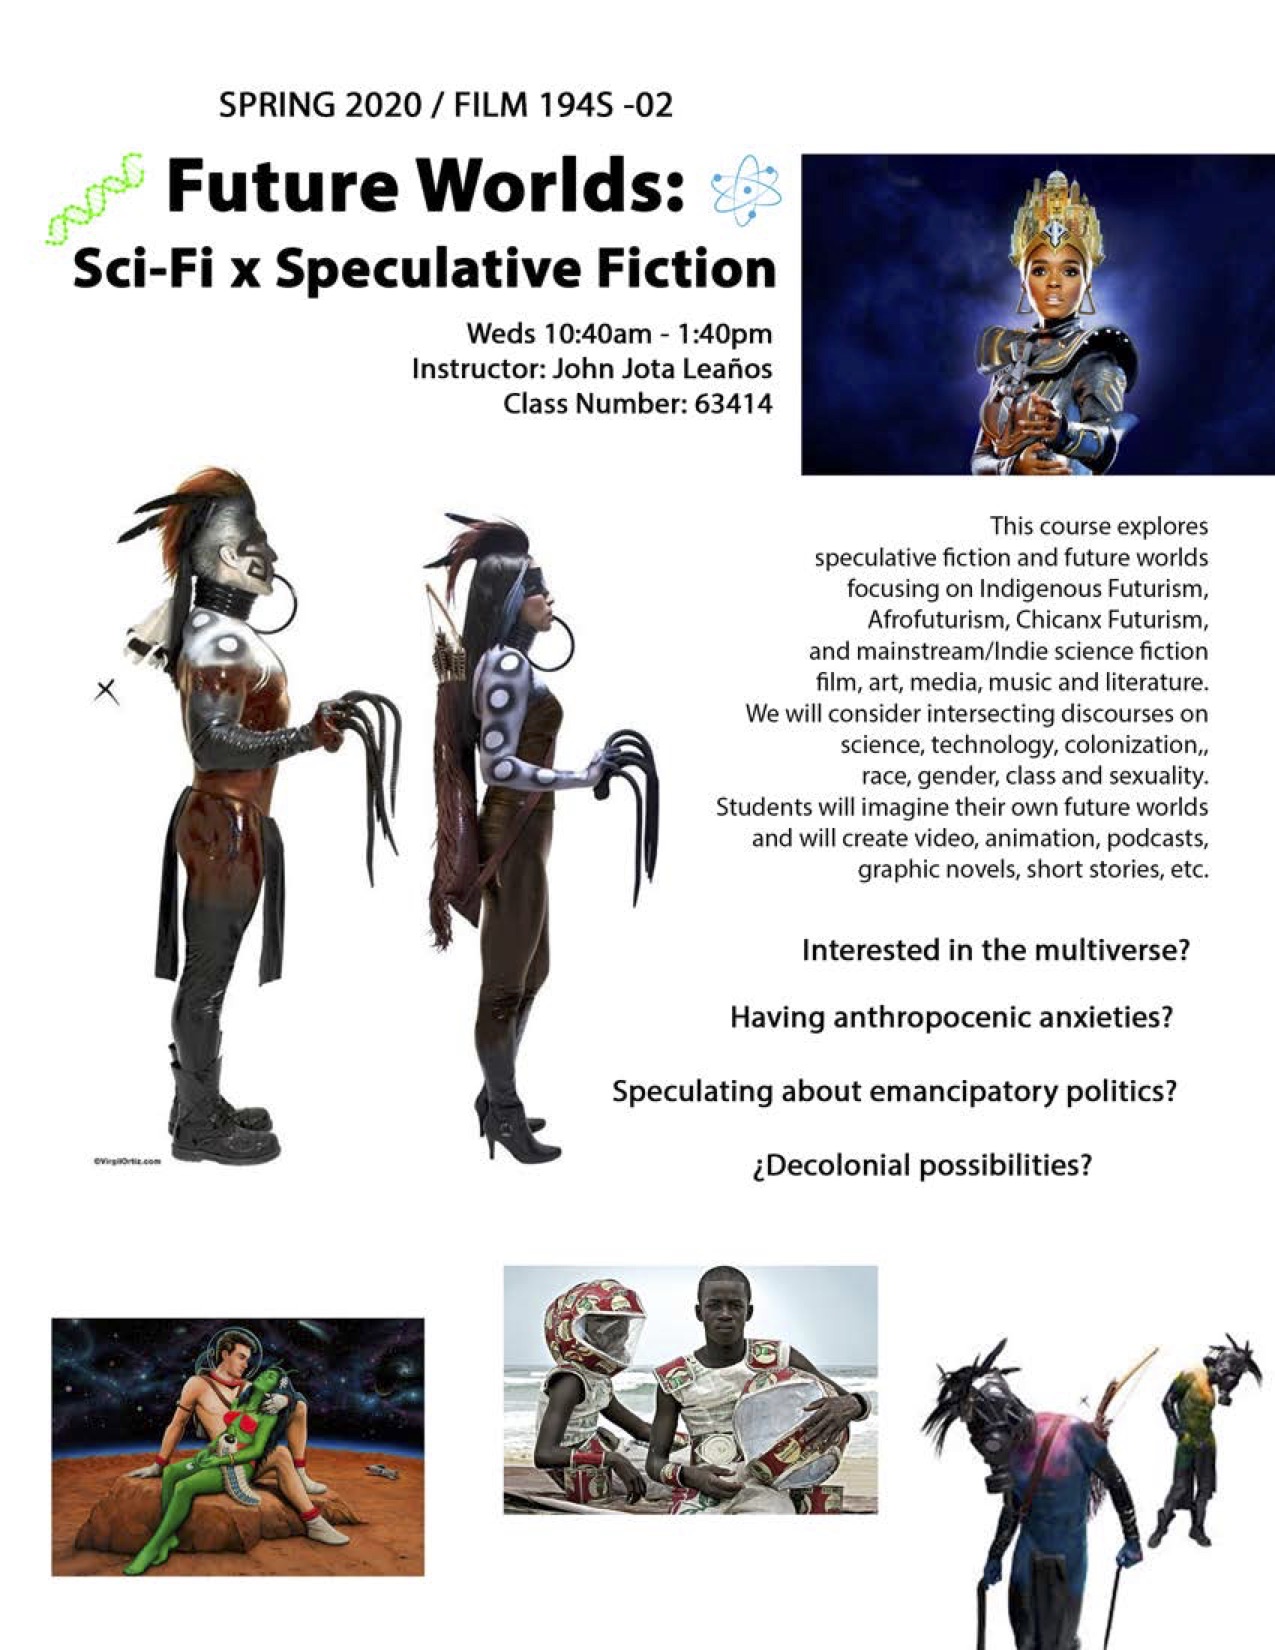 Flyer for Future Worlds Sci Fi Speculative Fiction senior seminar featuring images of indigenous afro and chicanx futurism